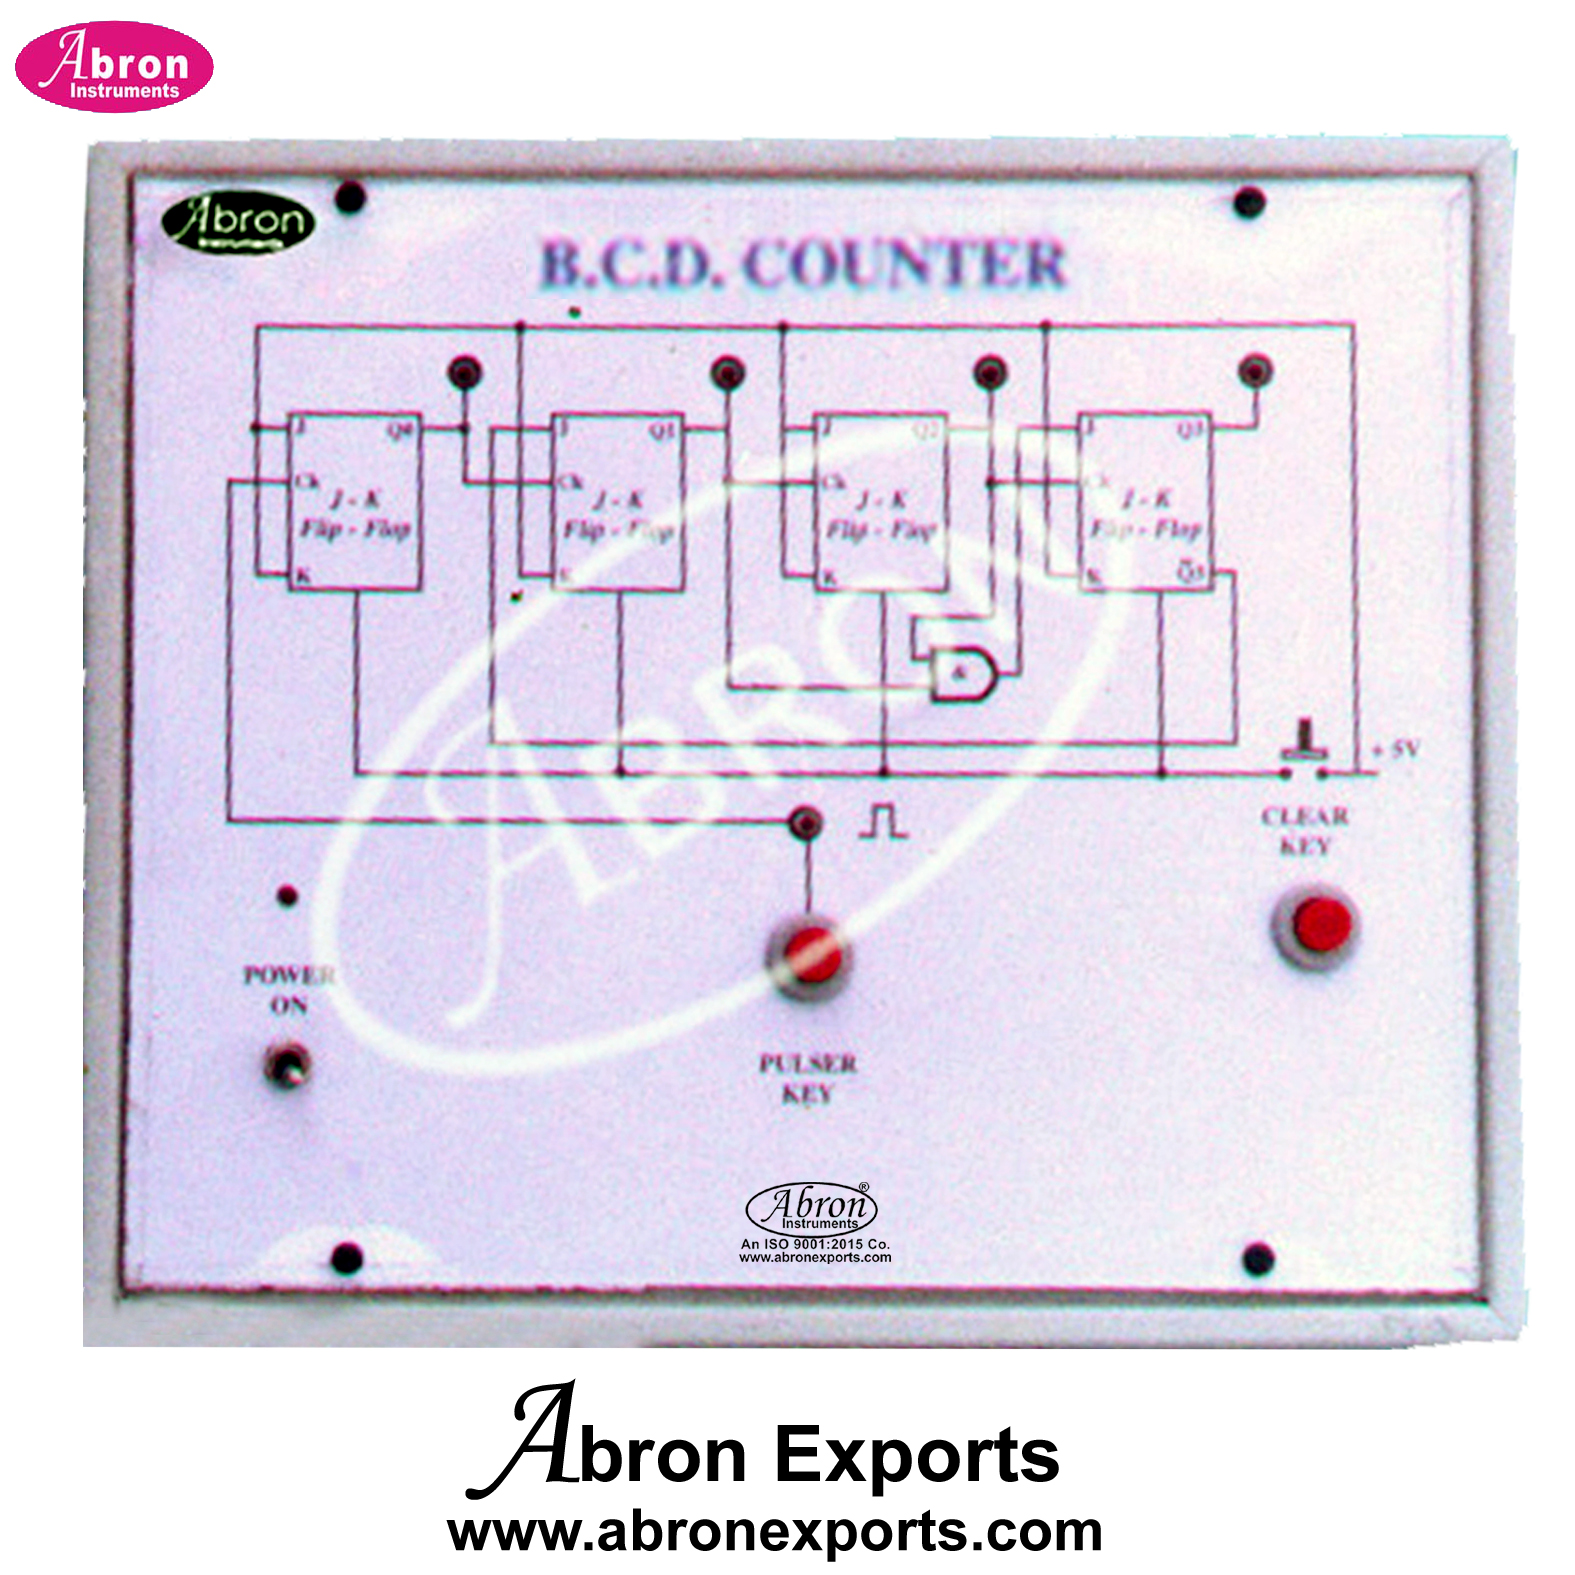 BCD Counter Logic Gates Digital ETB Electronic Trainer Board With Circuit Sockets Power Supply Abron AE-1210AB 